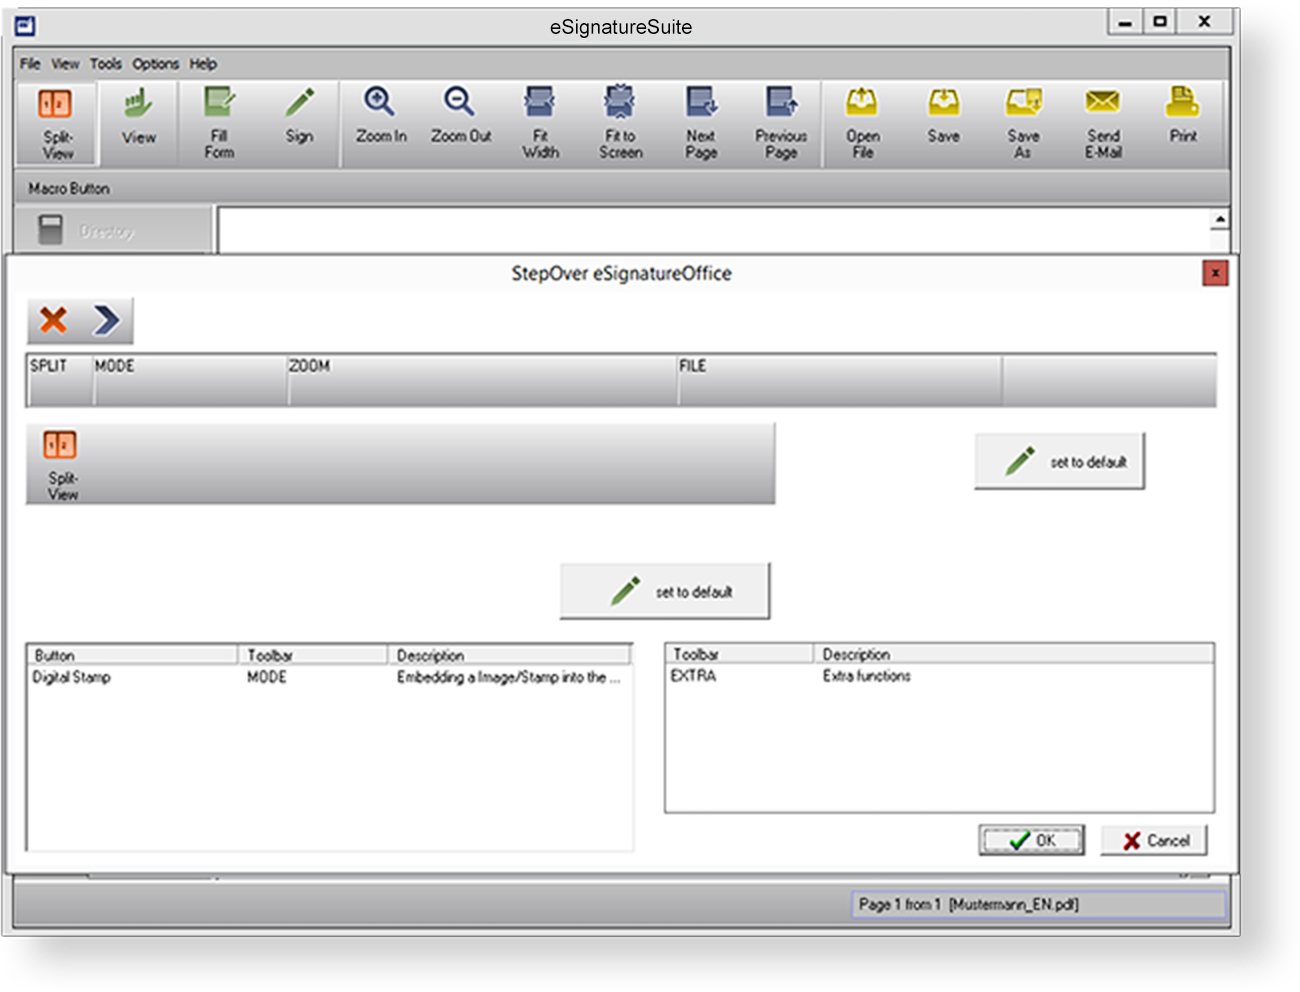 A totally flexible standard application
Upon signing using the eSignatureSuite, the document can be automatically forwarded through the customer's internal workflow. Numerous possibilities for integration into existing processes are available.